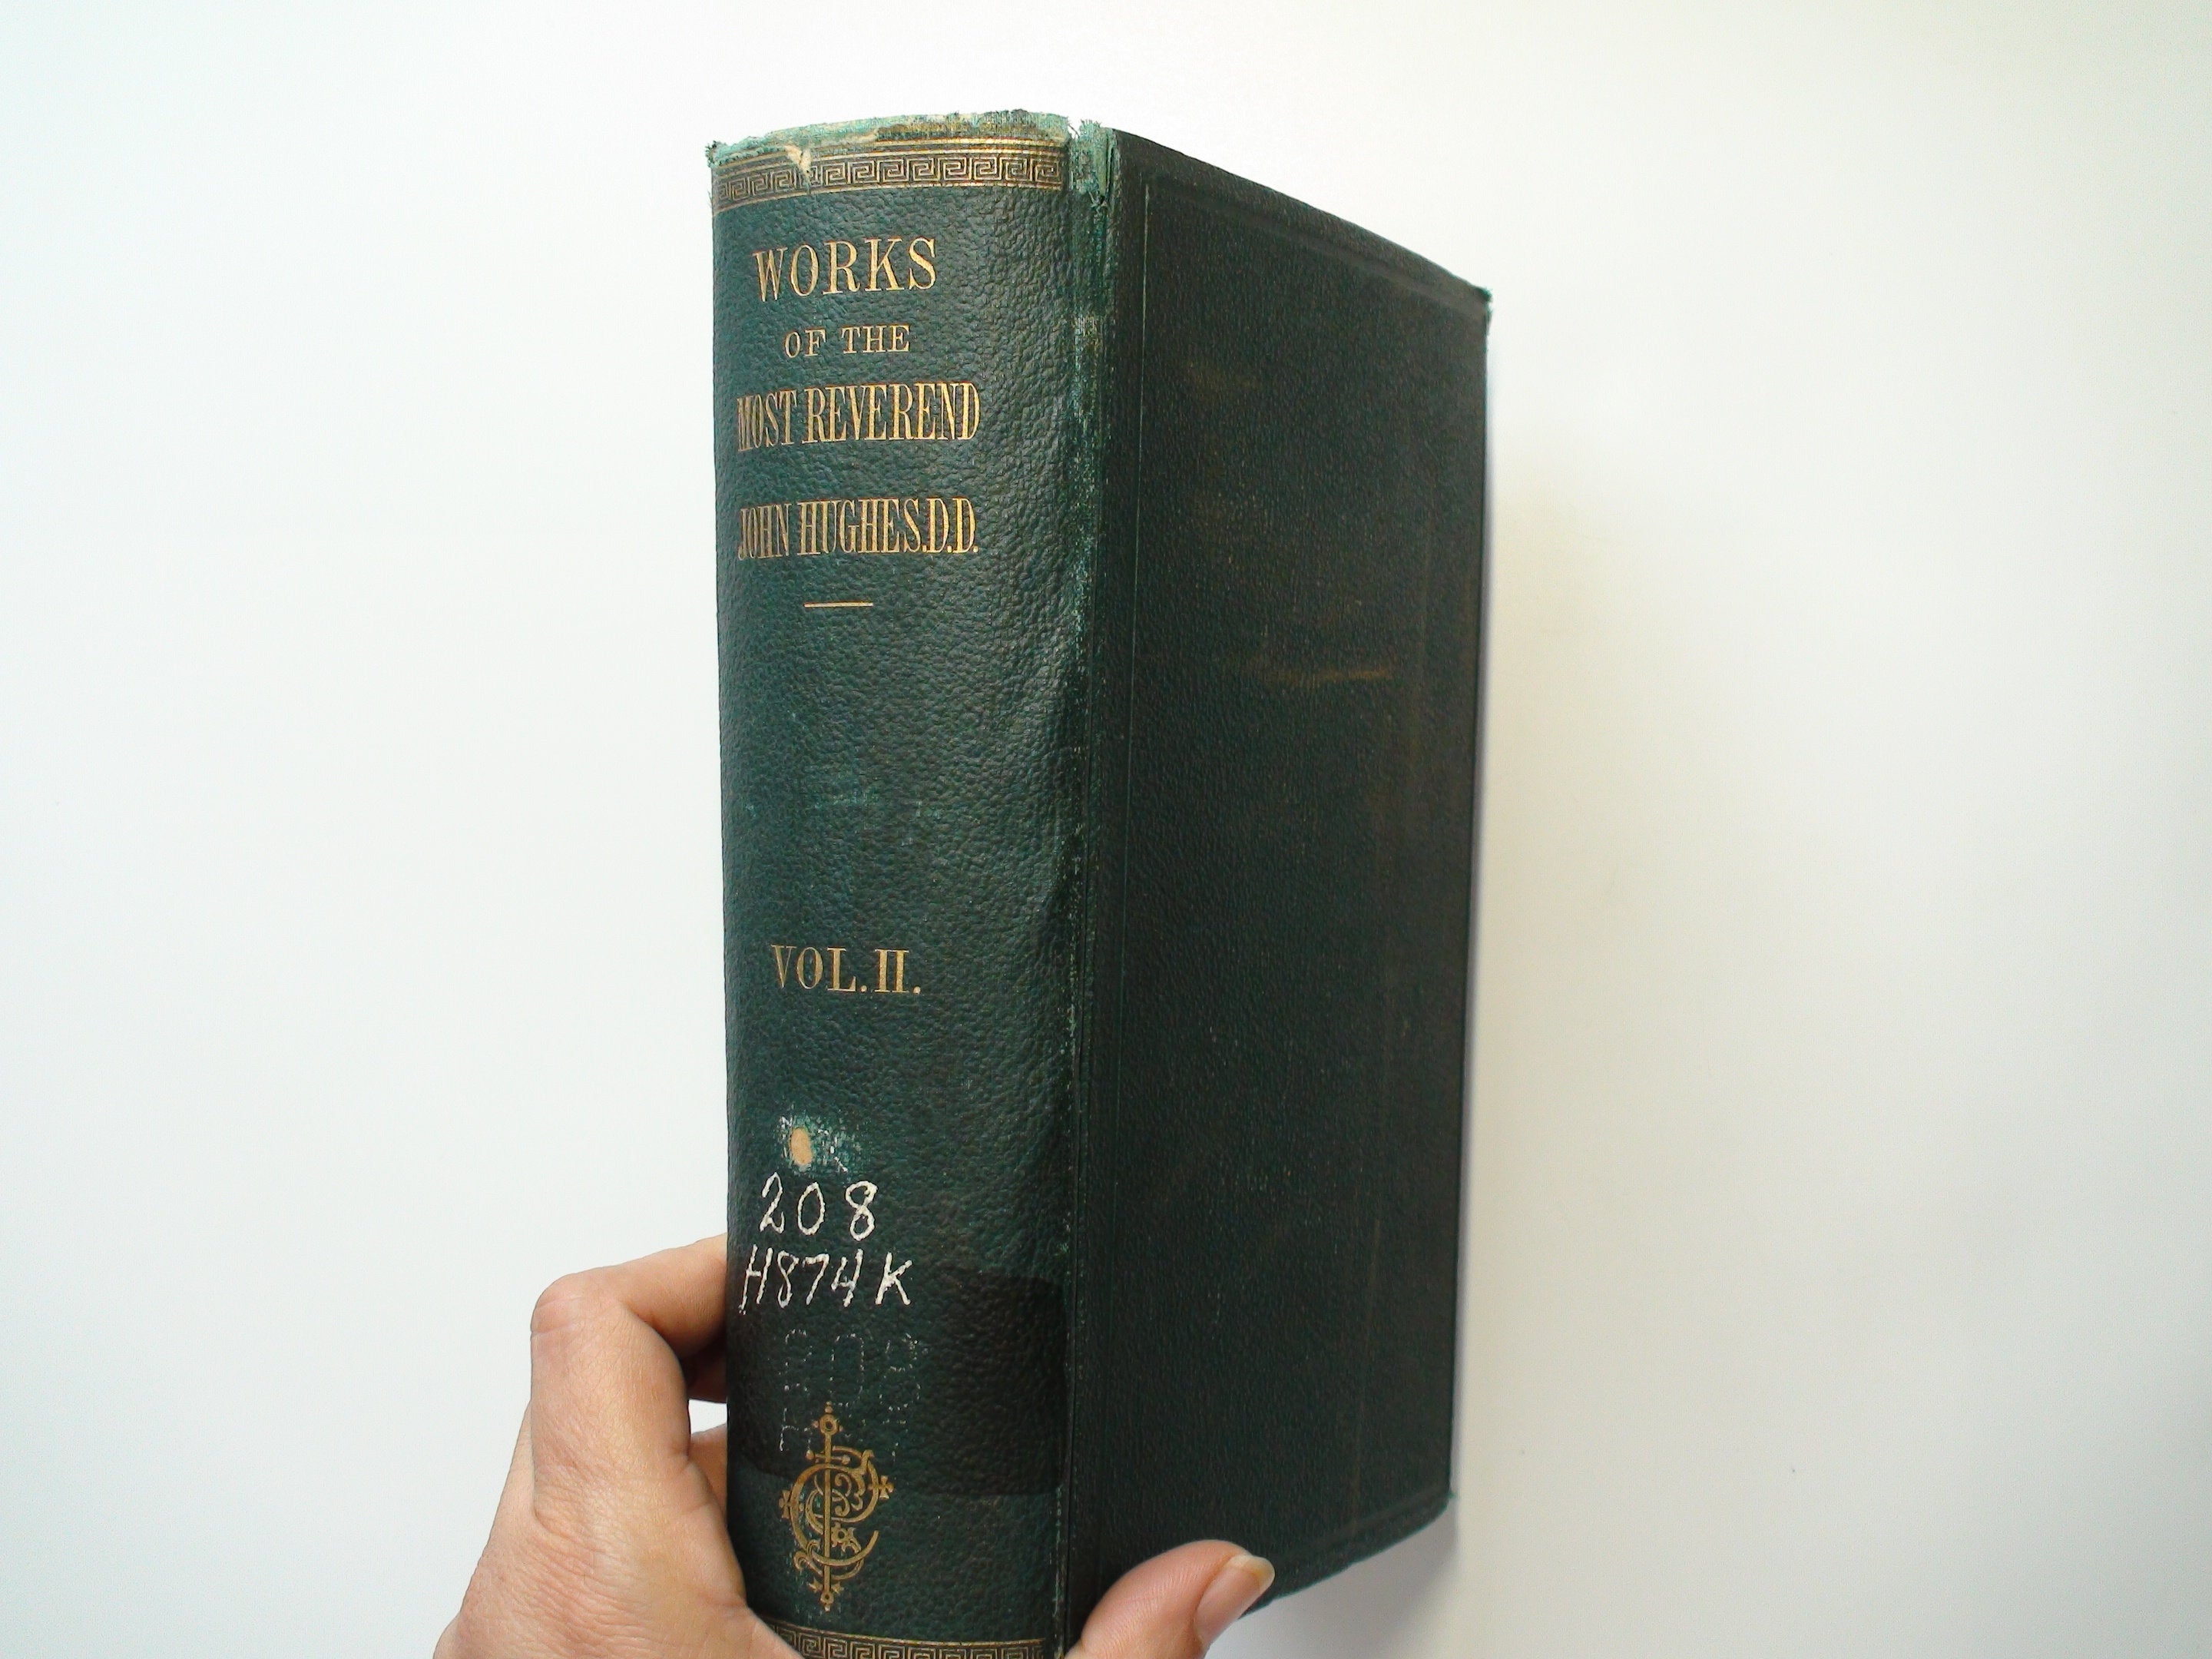 Complete Works of the Most Rev. John Hughes, Vol 2, Lawrence Kehoe, 1st Ed, 1864